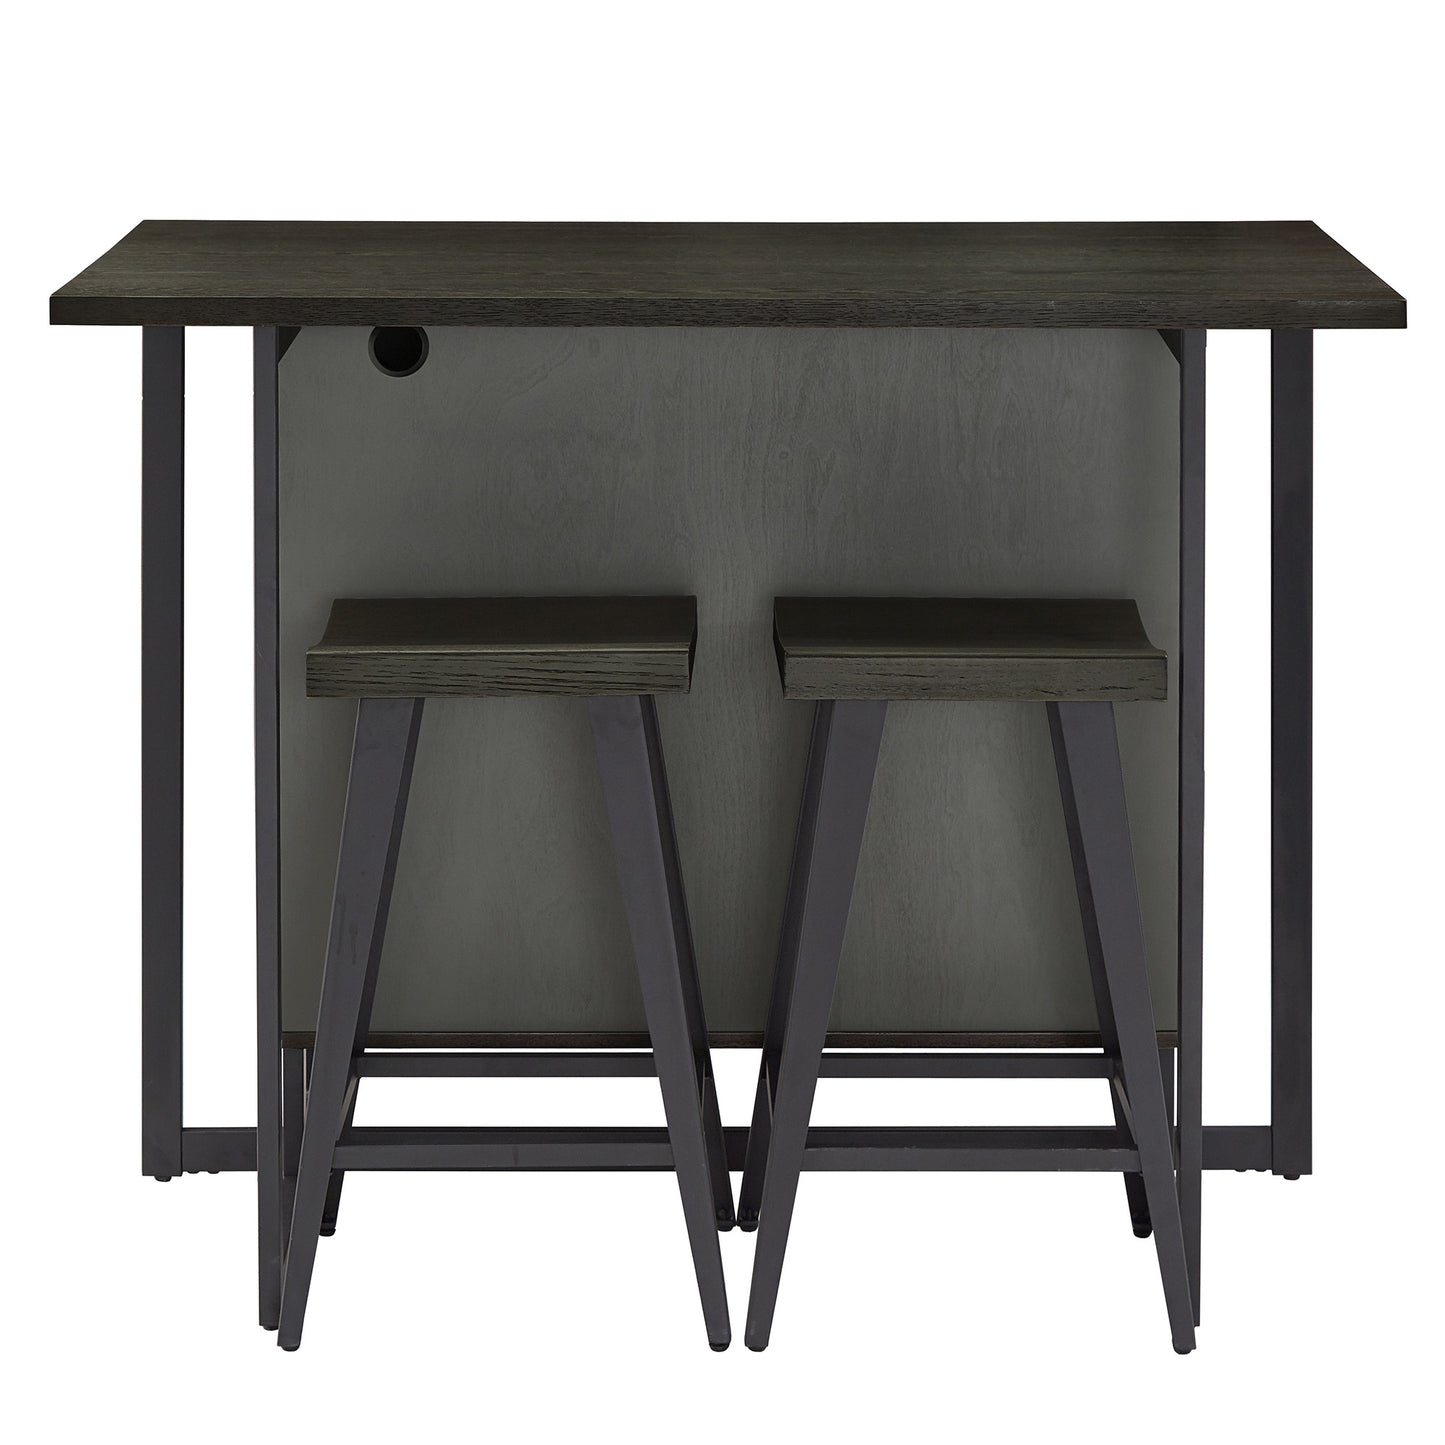 Black Finish 2-door Kitchen Island with Power and USB outlets and 2 Stools